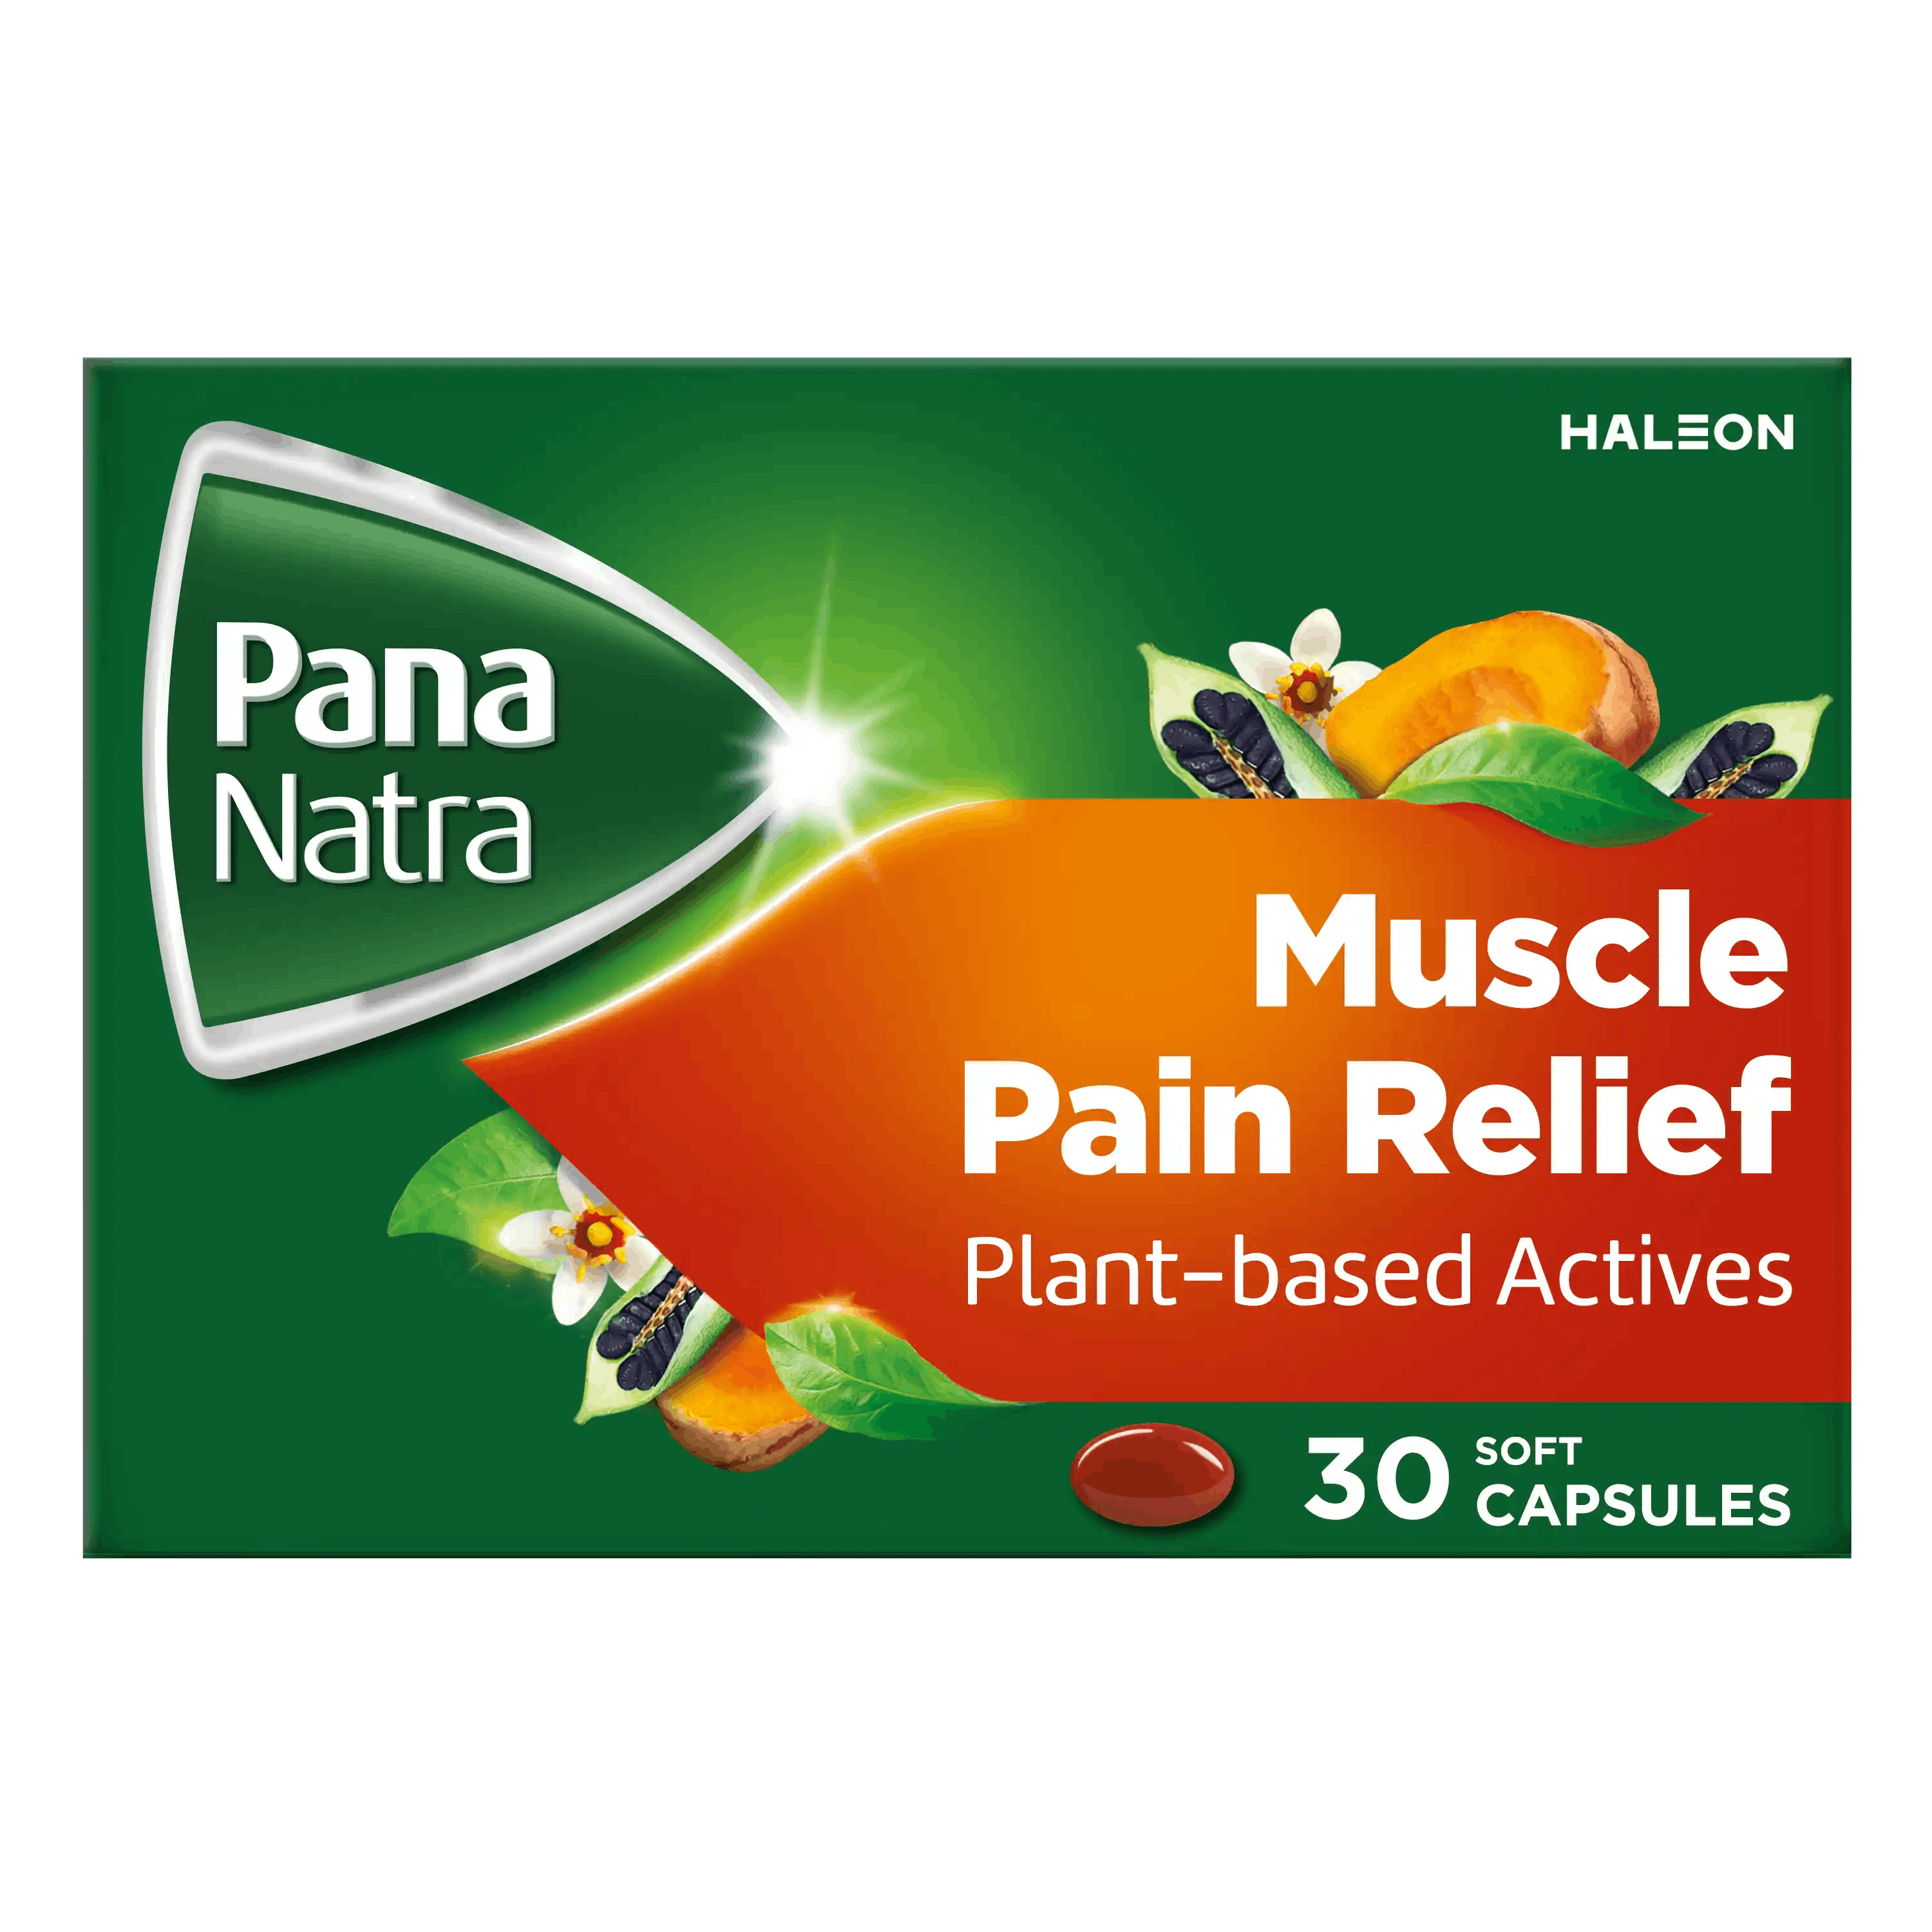 Muscle Pain relief